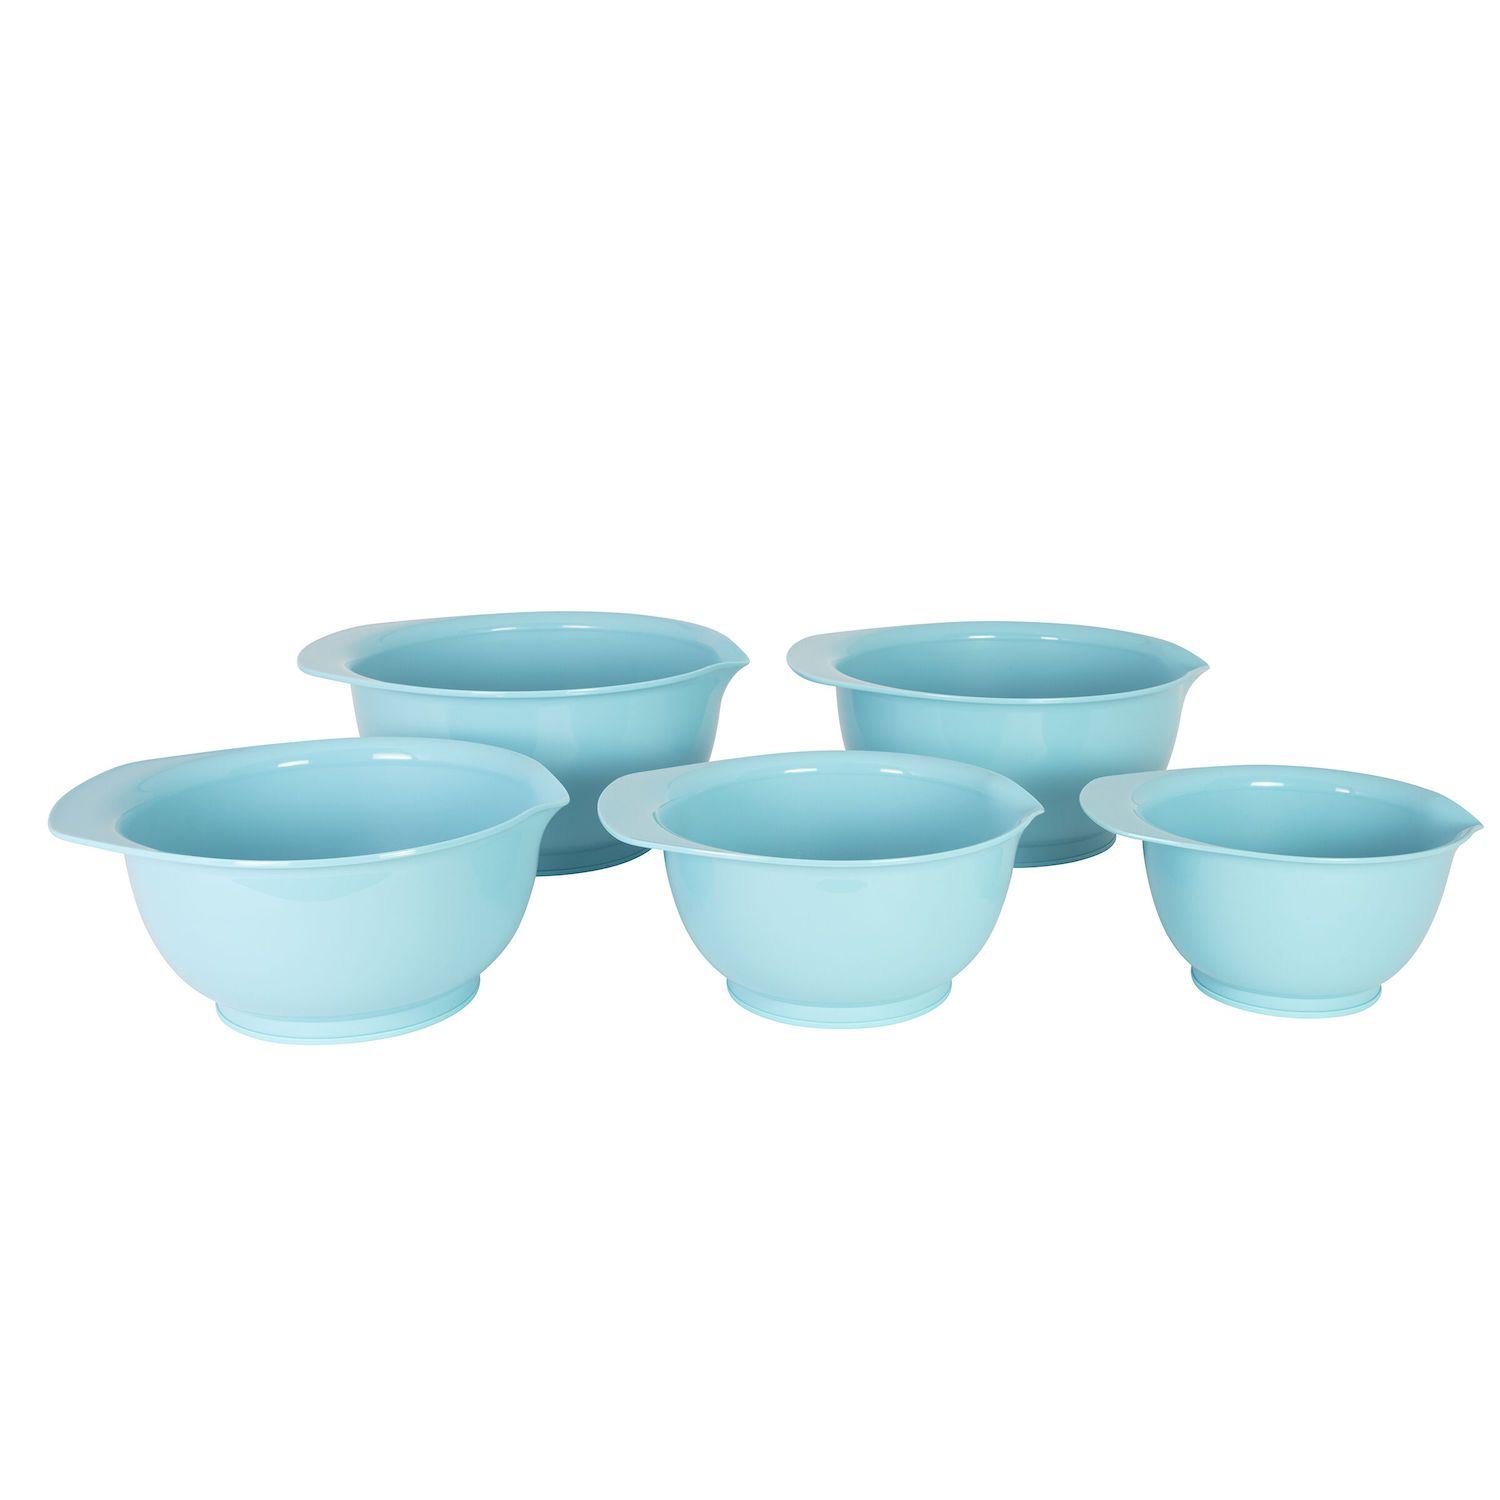 Gibson Home Plaza Cafe 3 Piece Stackable Nesting Mixing Bowl Set